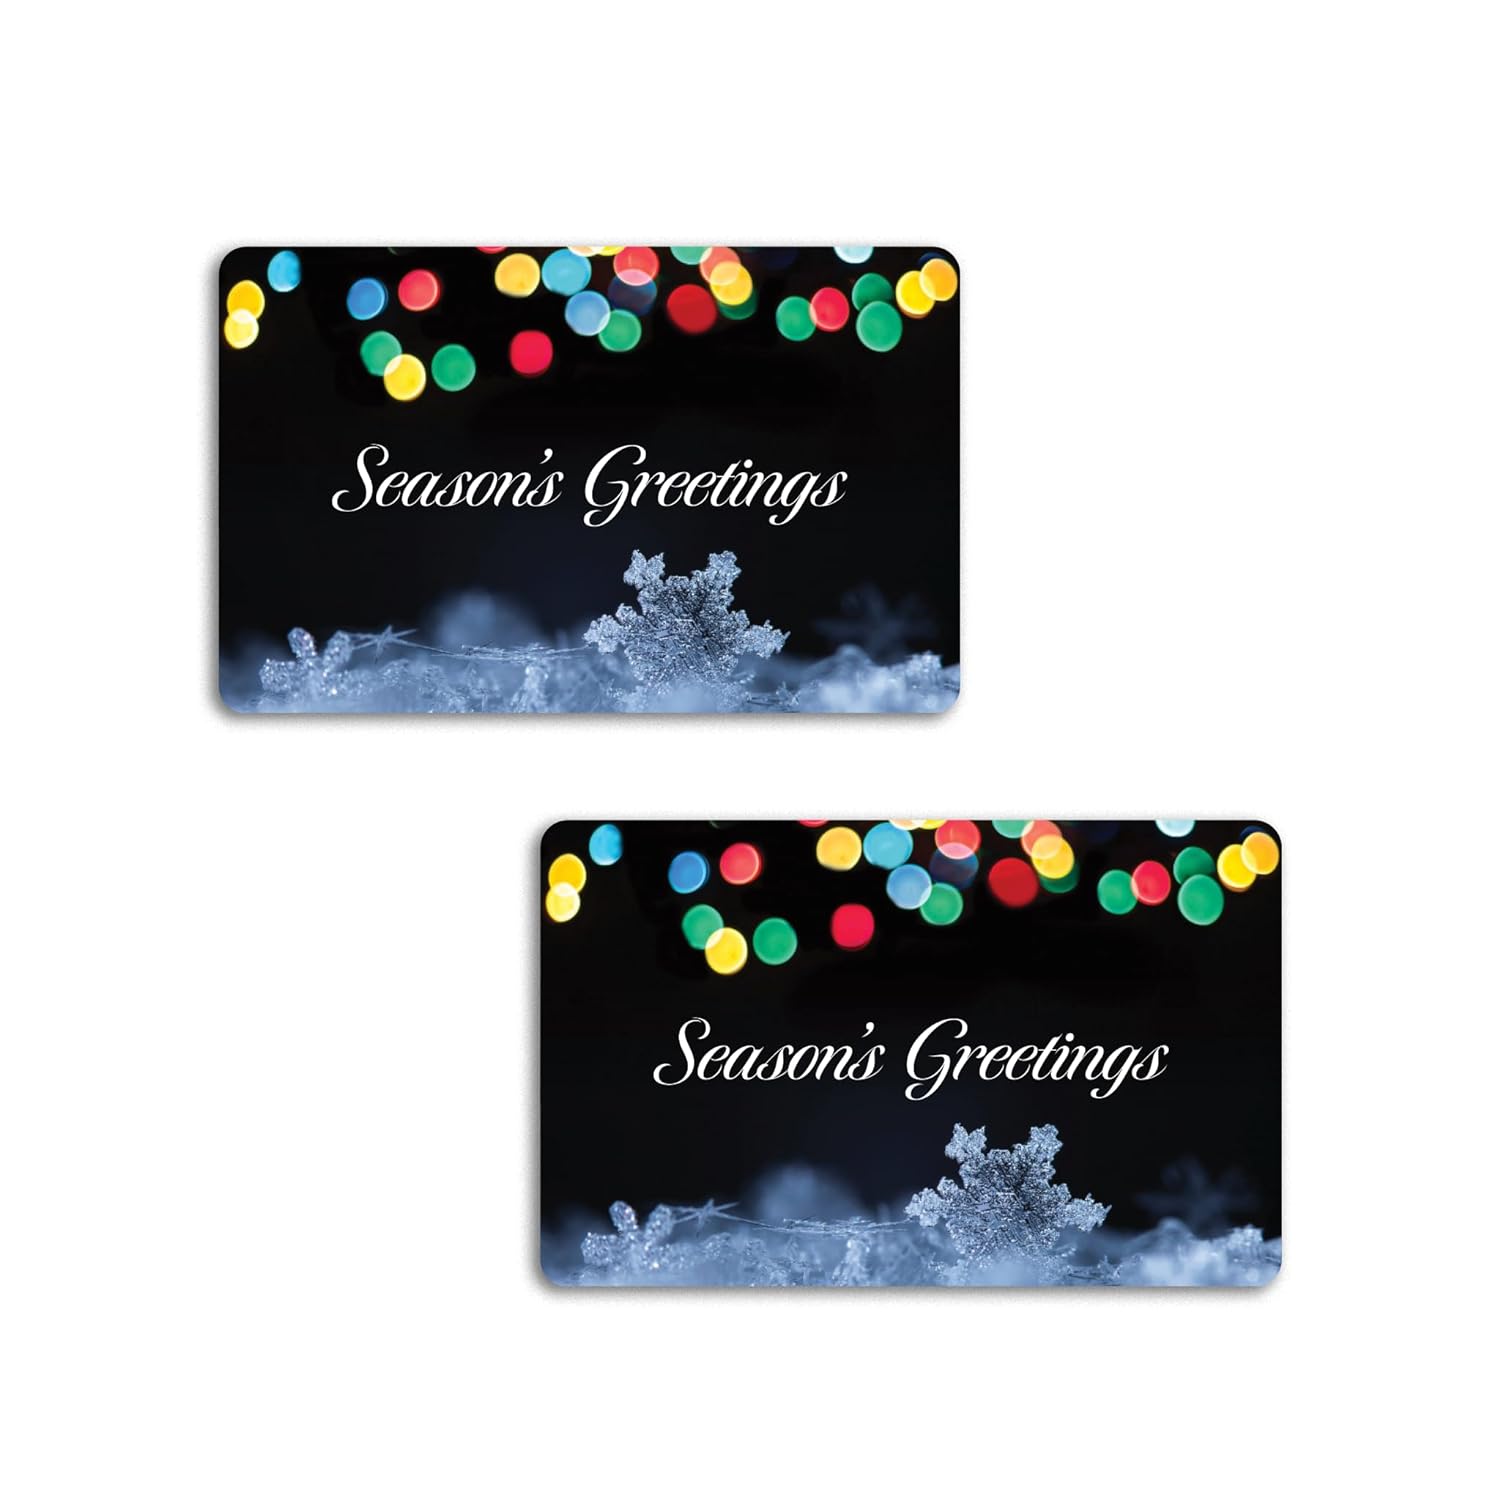 MF1K RFID Key Cards for Hotels and Motels with a Festive Holiday Design (Set of 500)